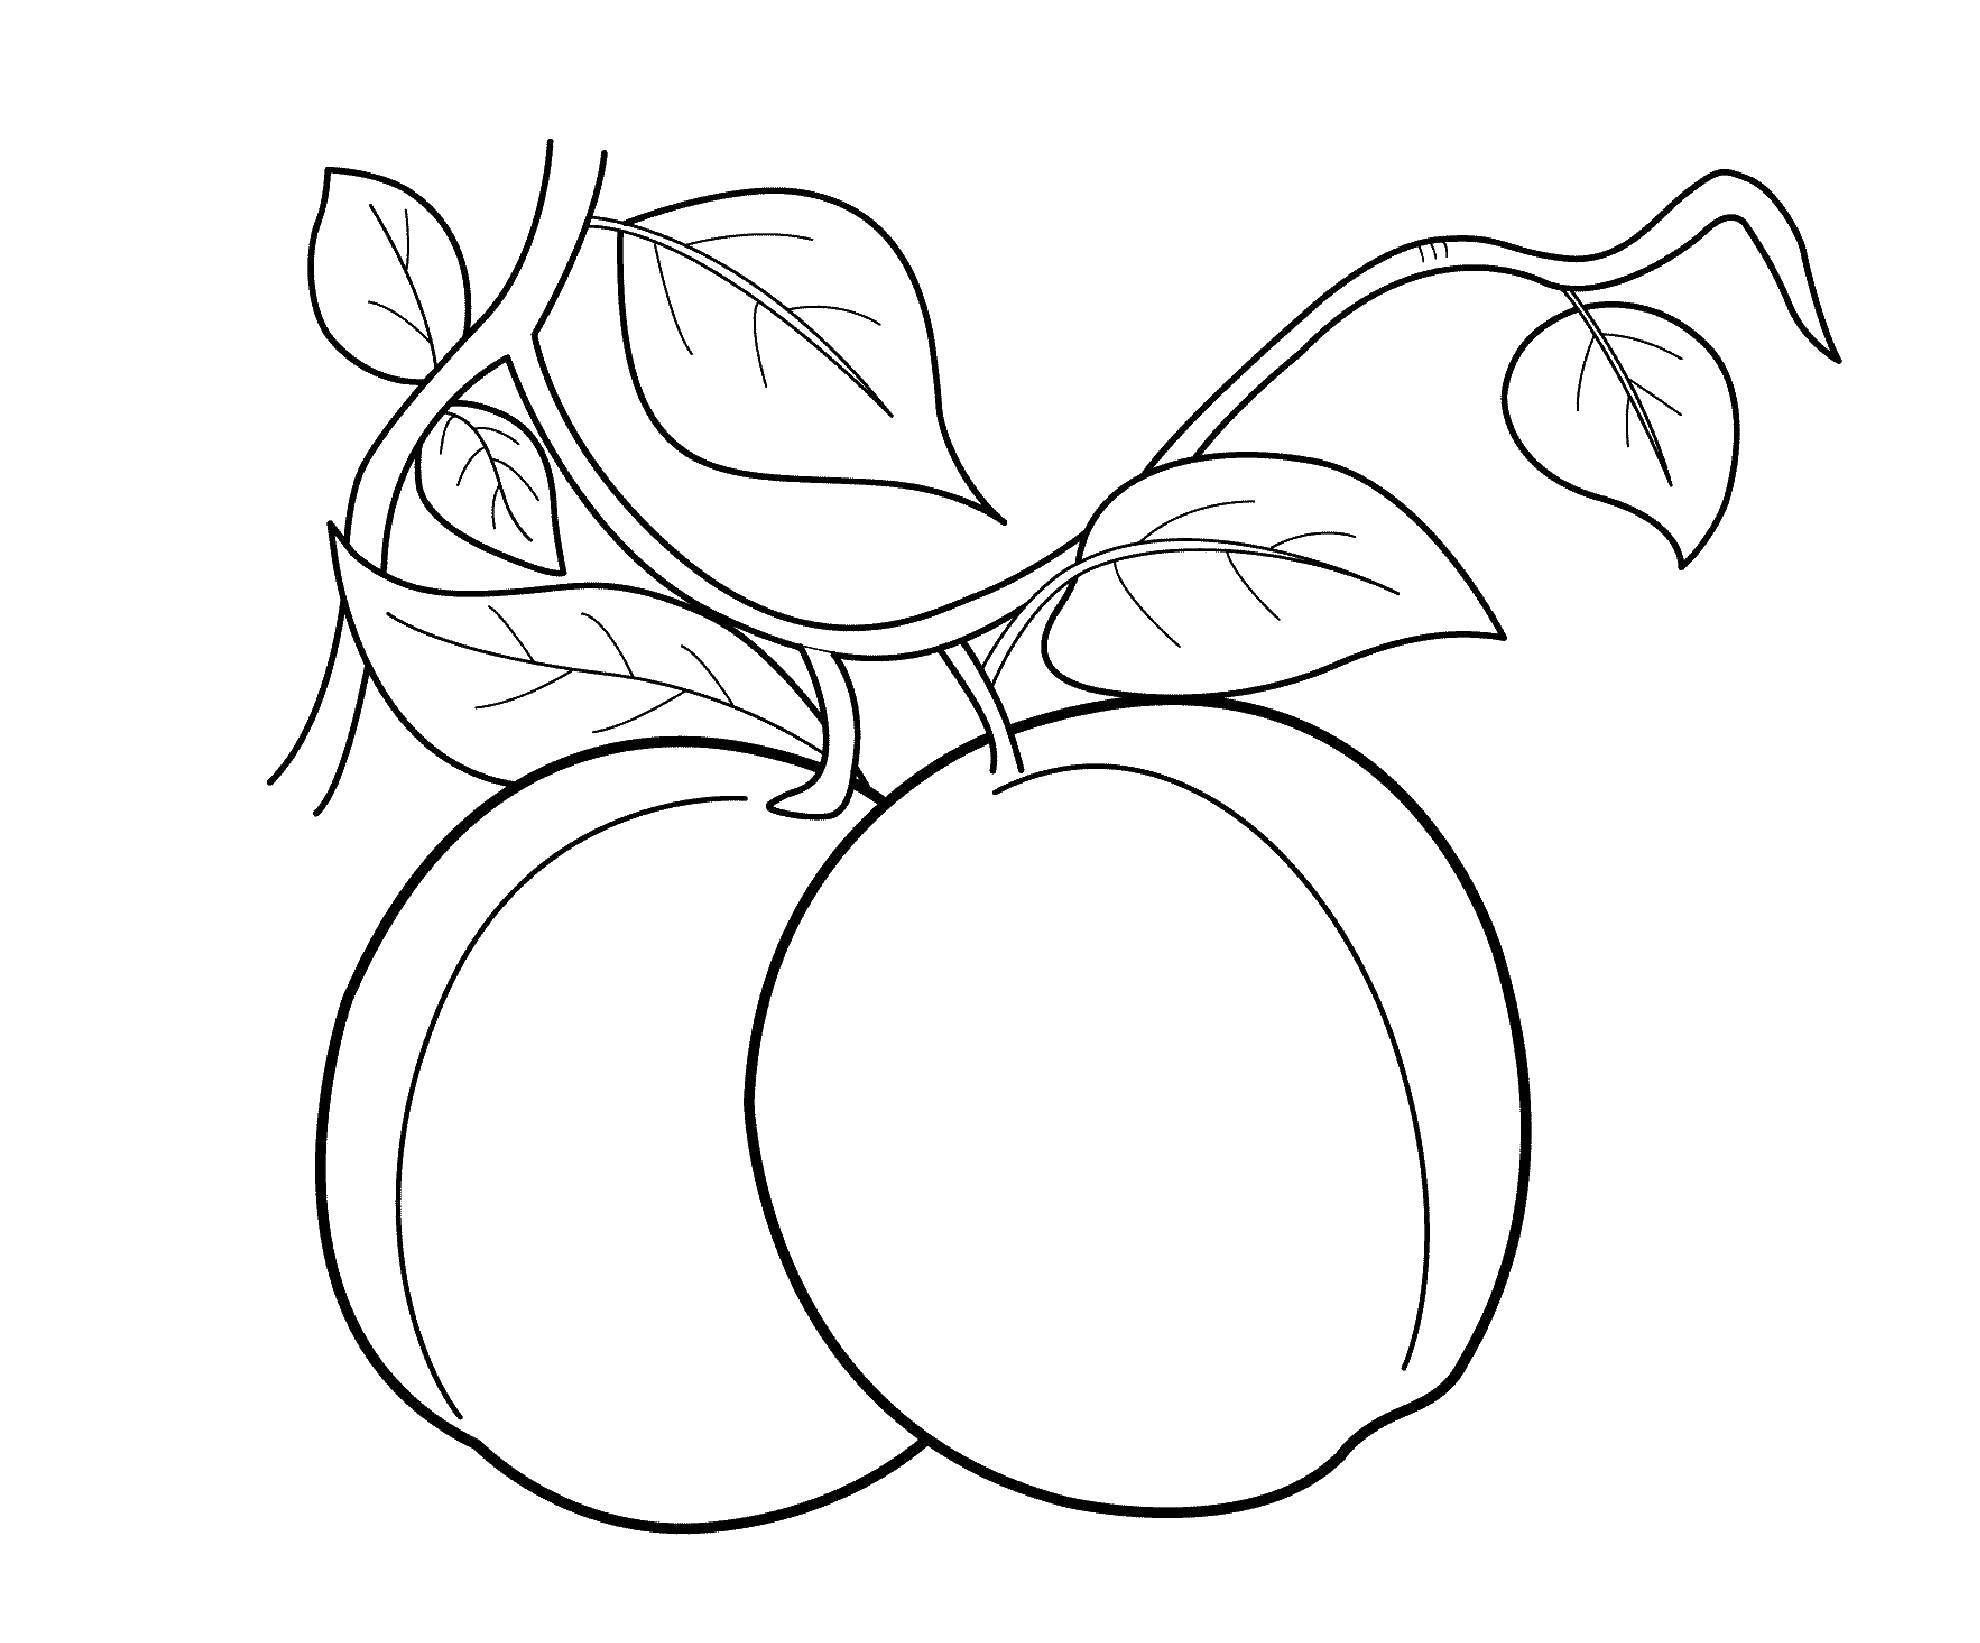 Coloring Peaches. Category fruits. Tags:  fruit, peach.